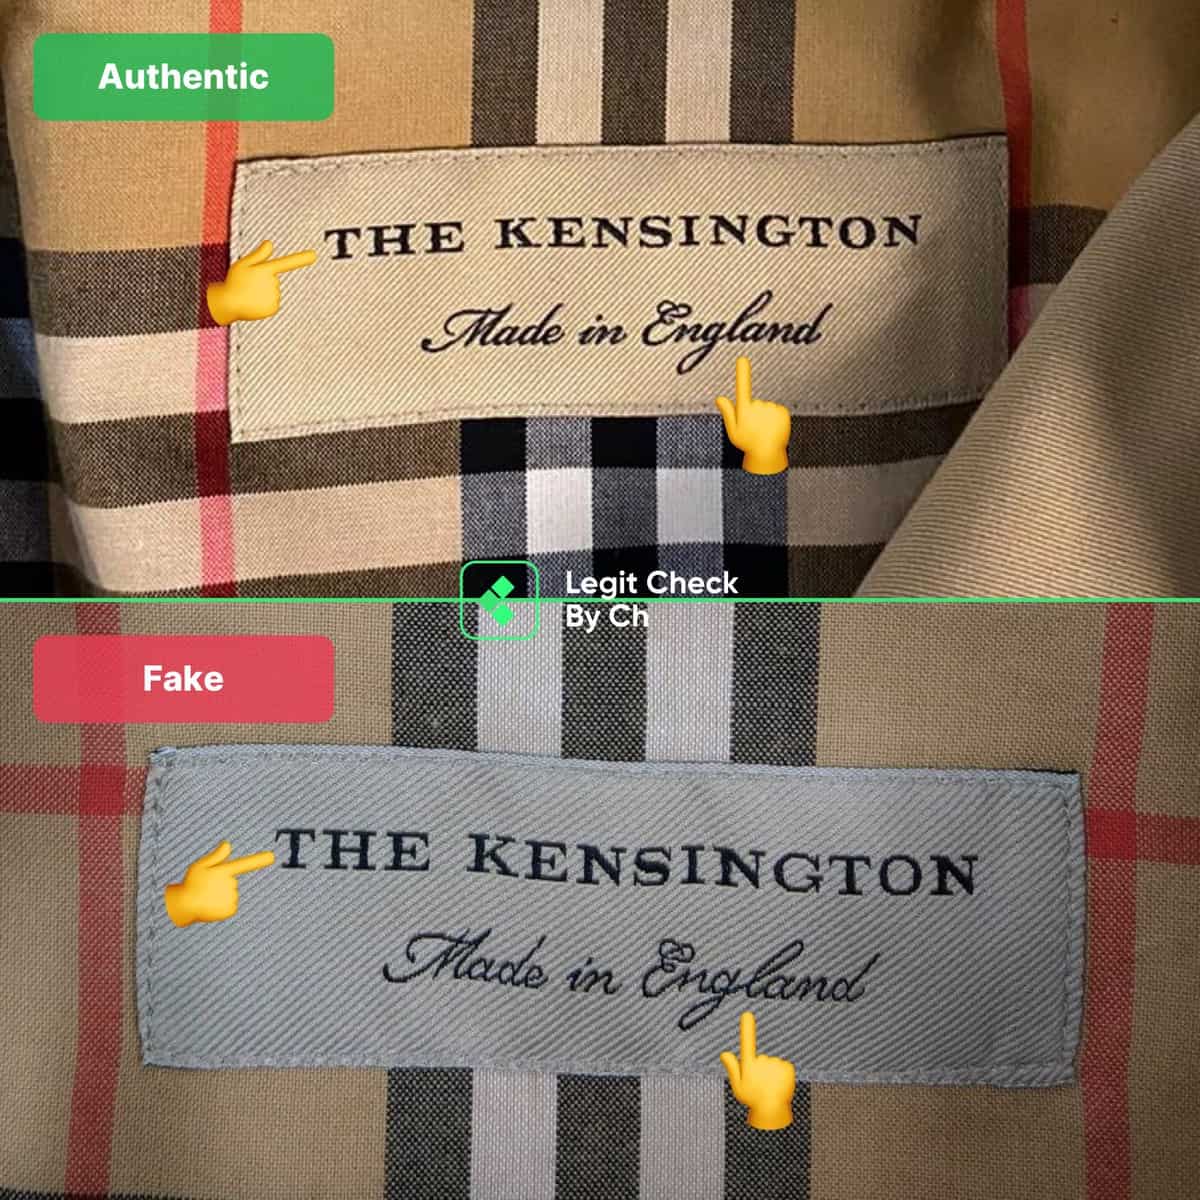 Real or fake Vintage Burberry : r/Burberry